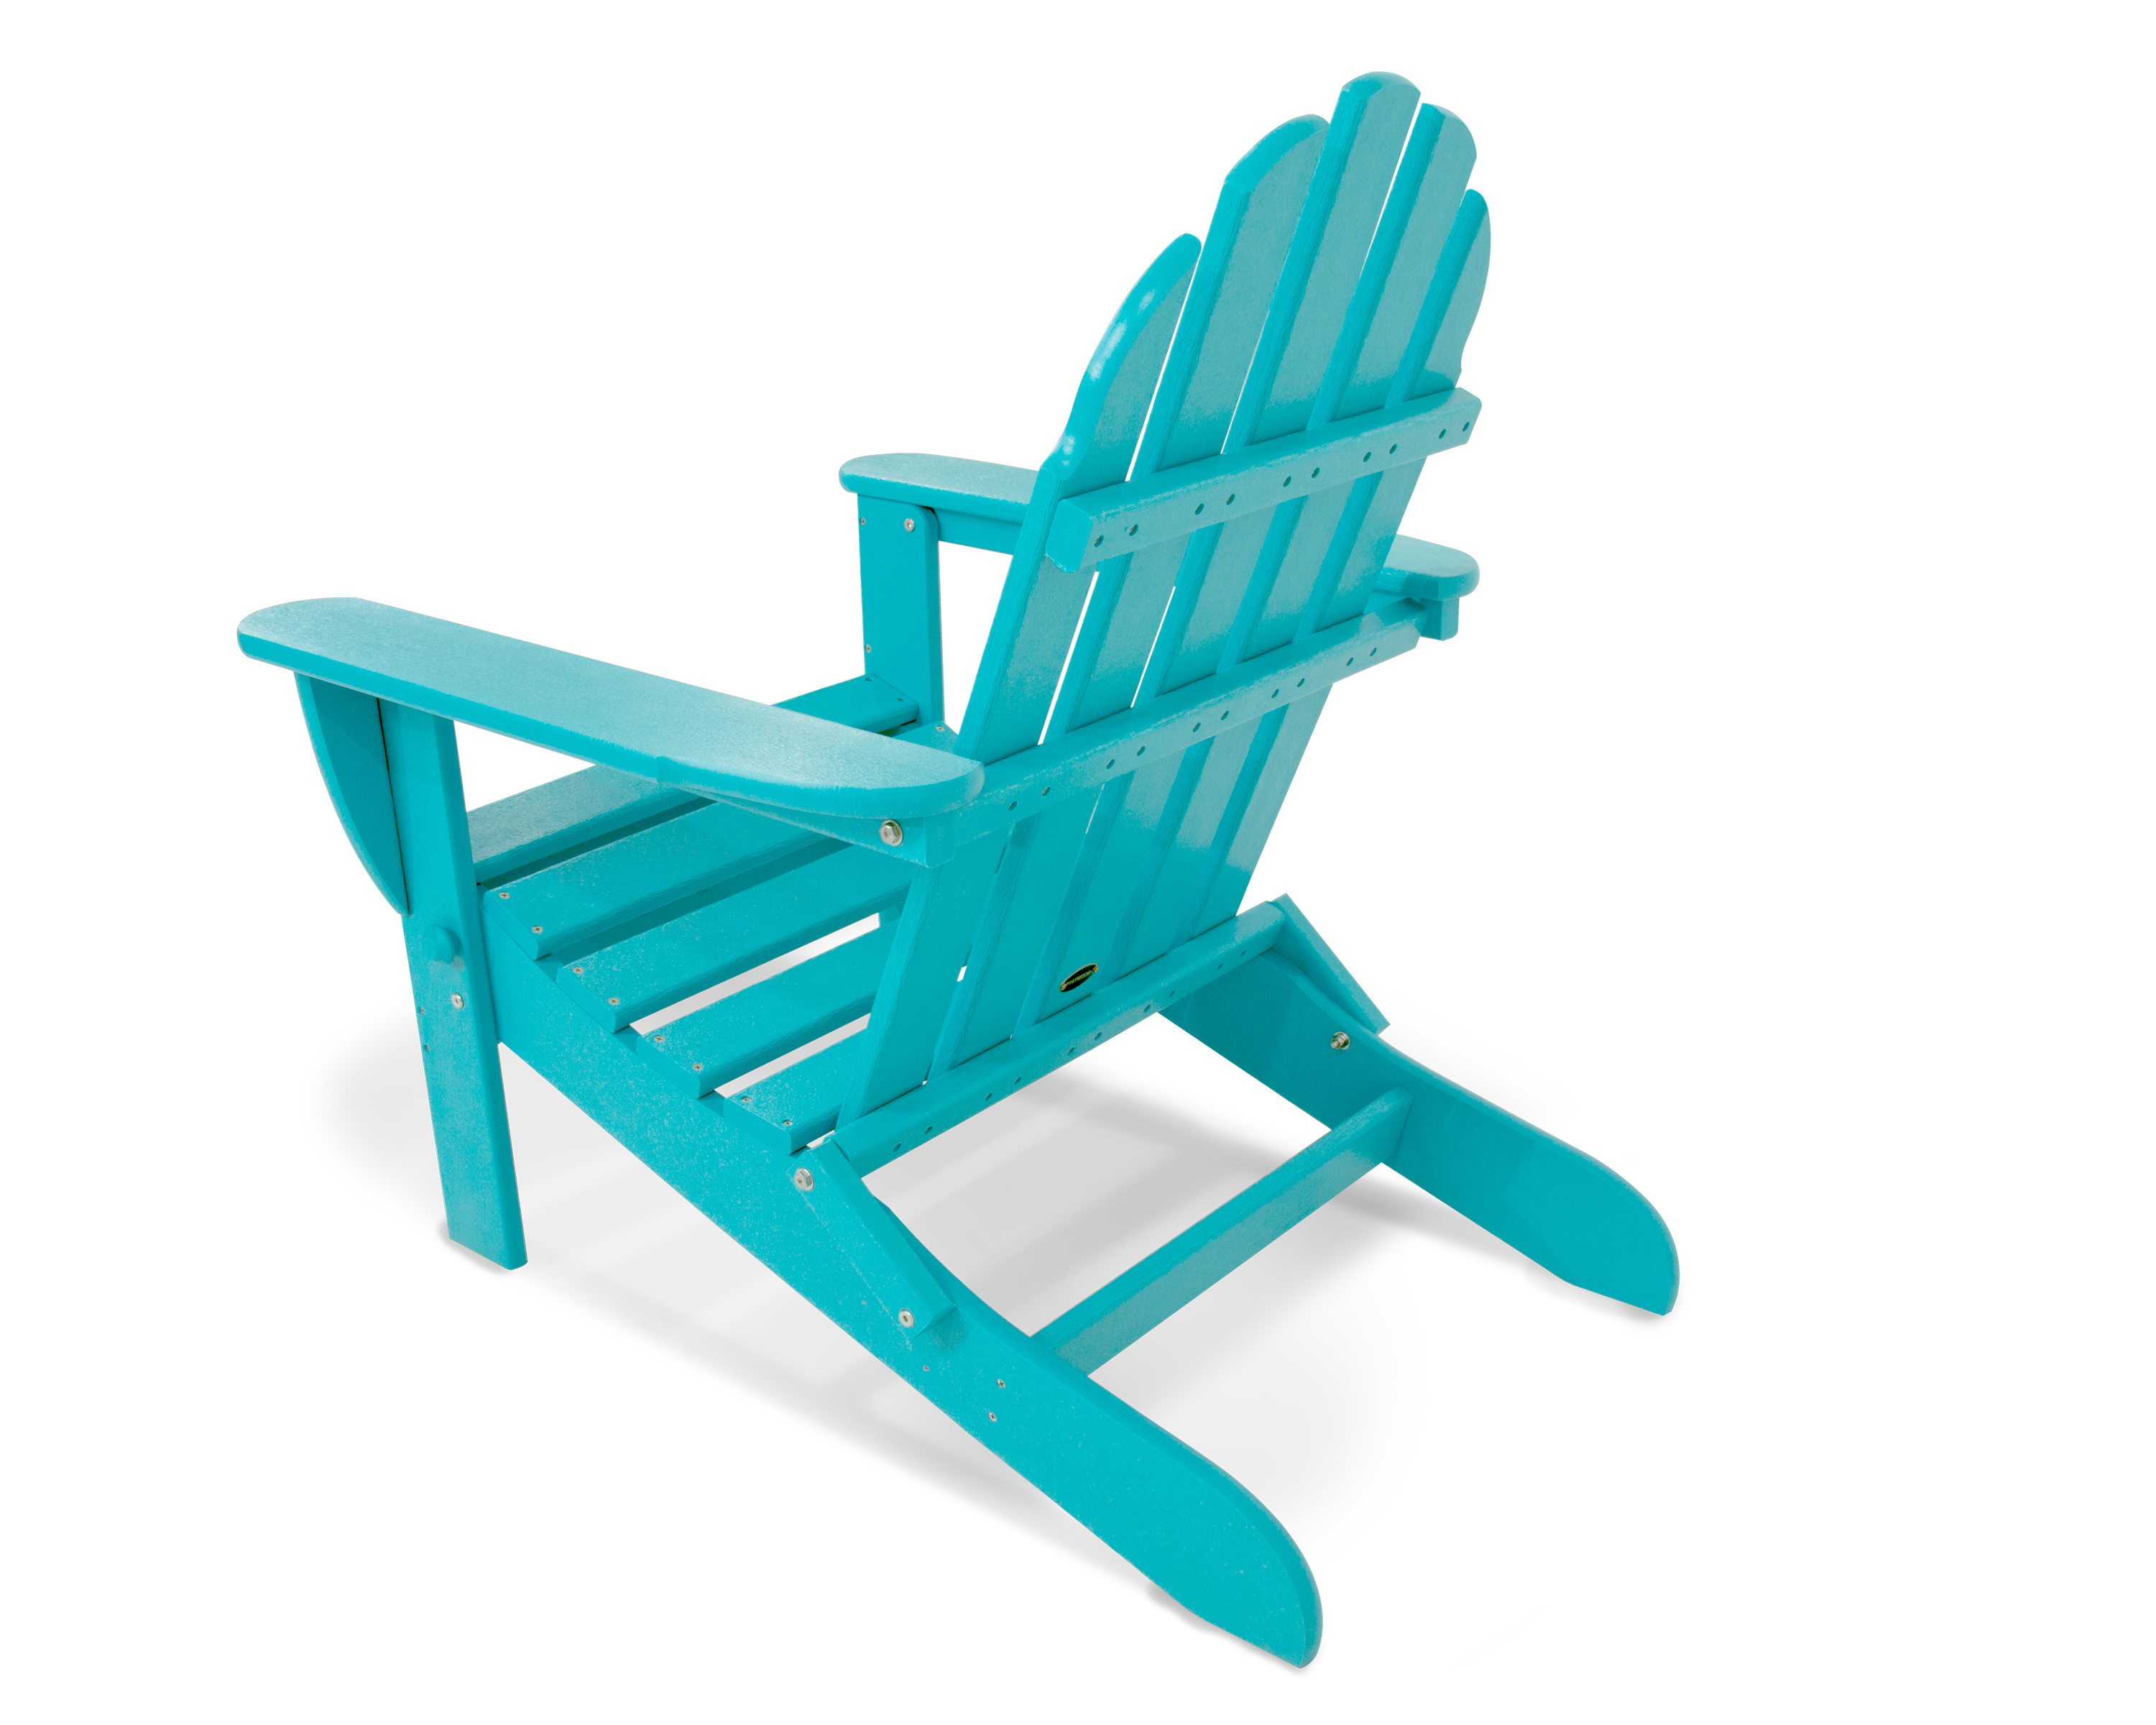 Summertime And Relaxation Take On A Whole New Meaning When You Kick Back In The Comfortably Contoured Seat Of The Polywood